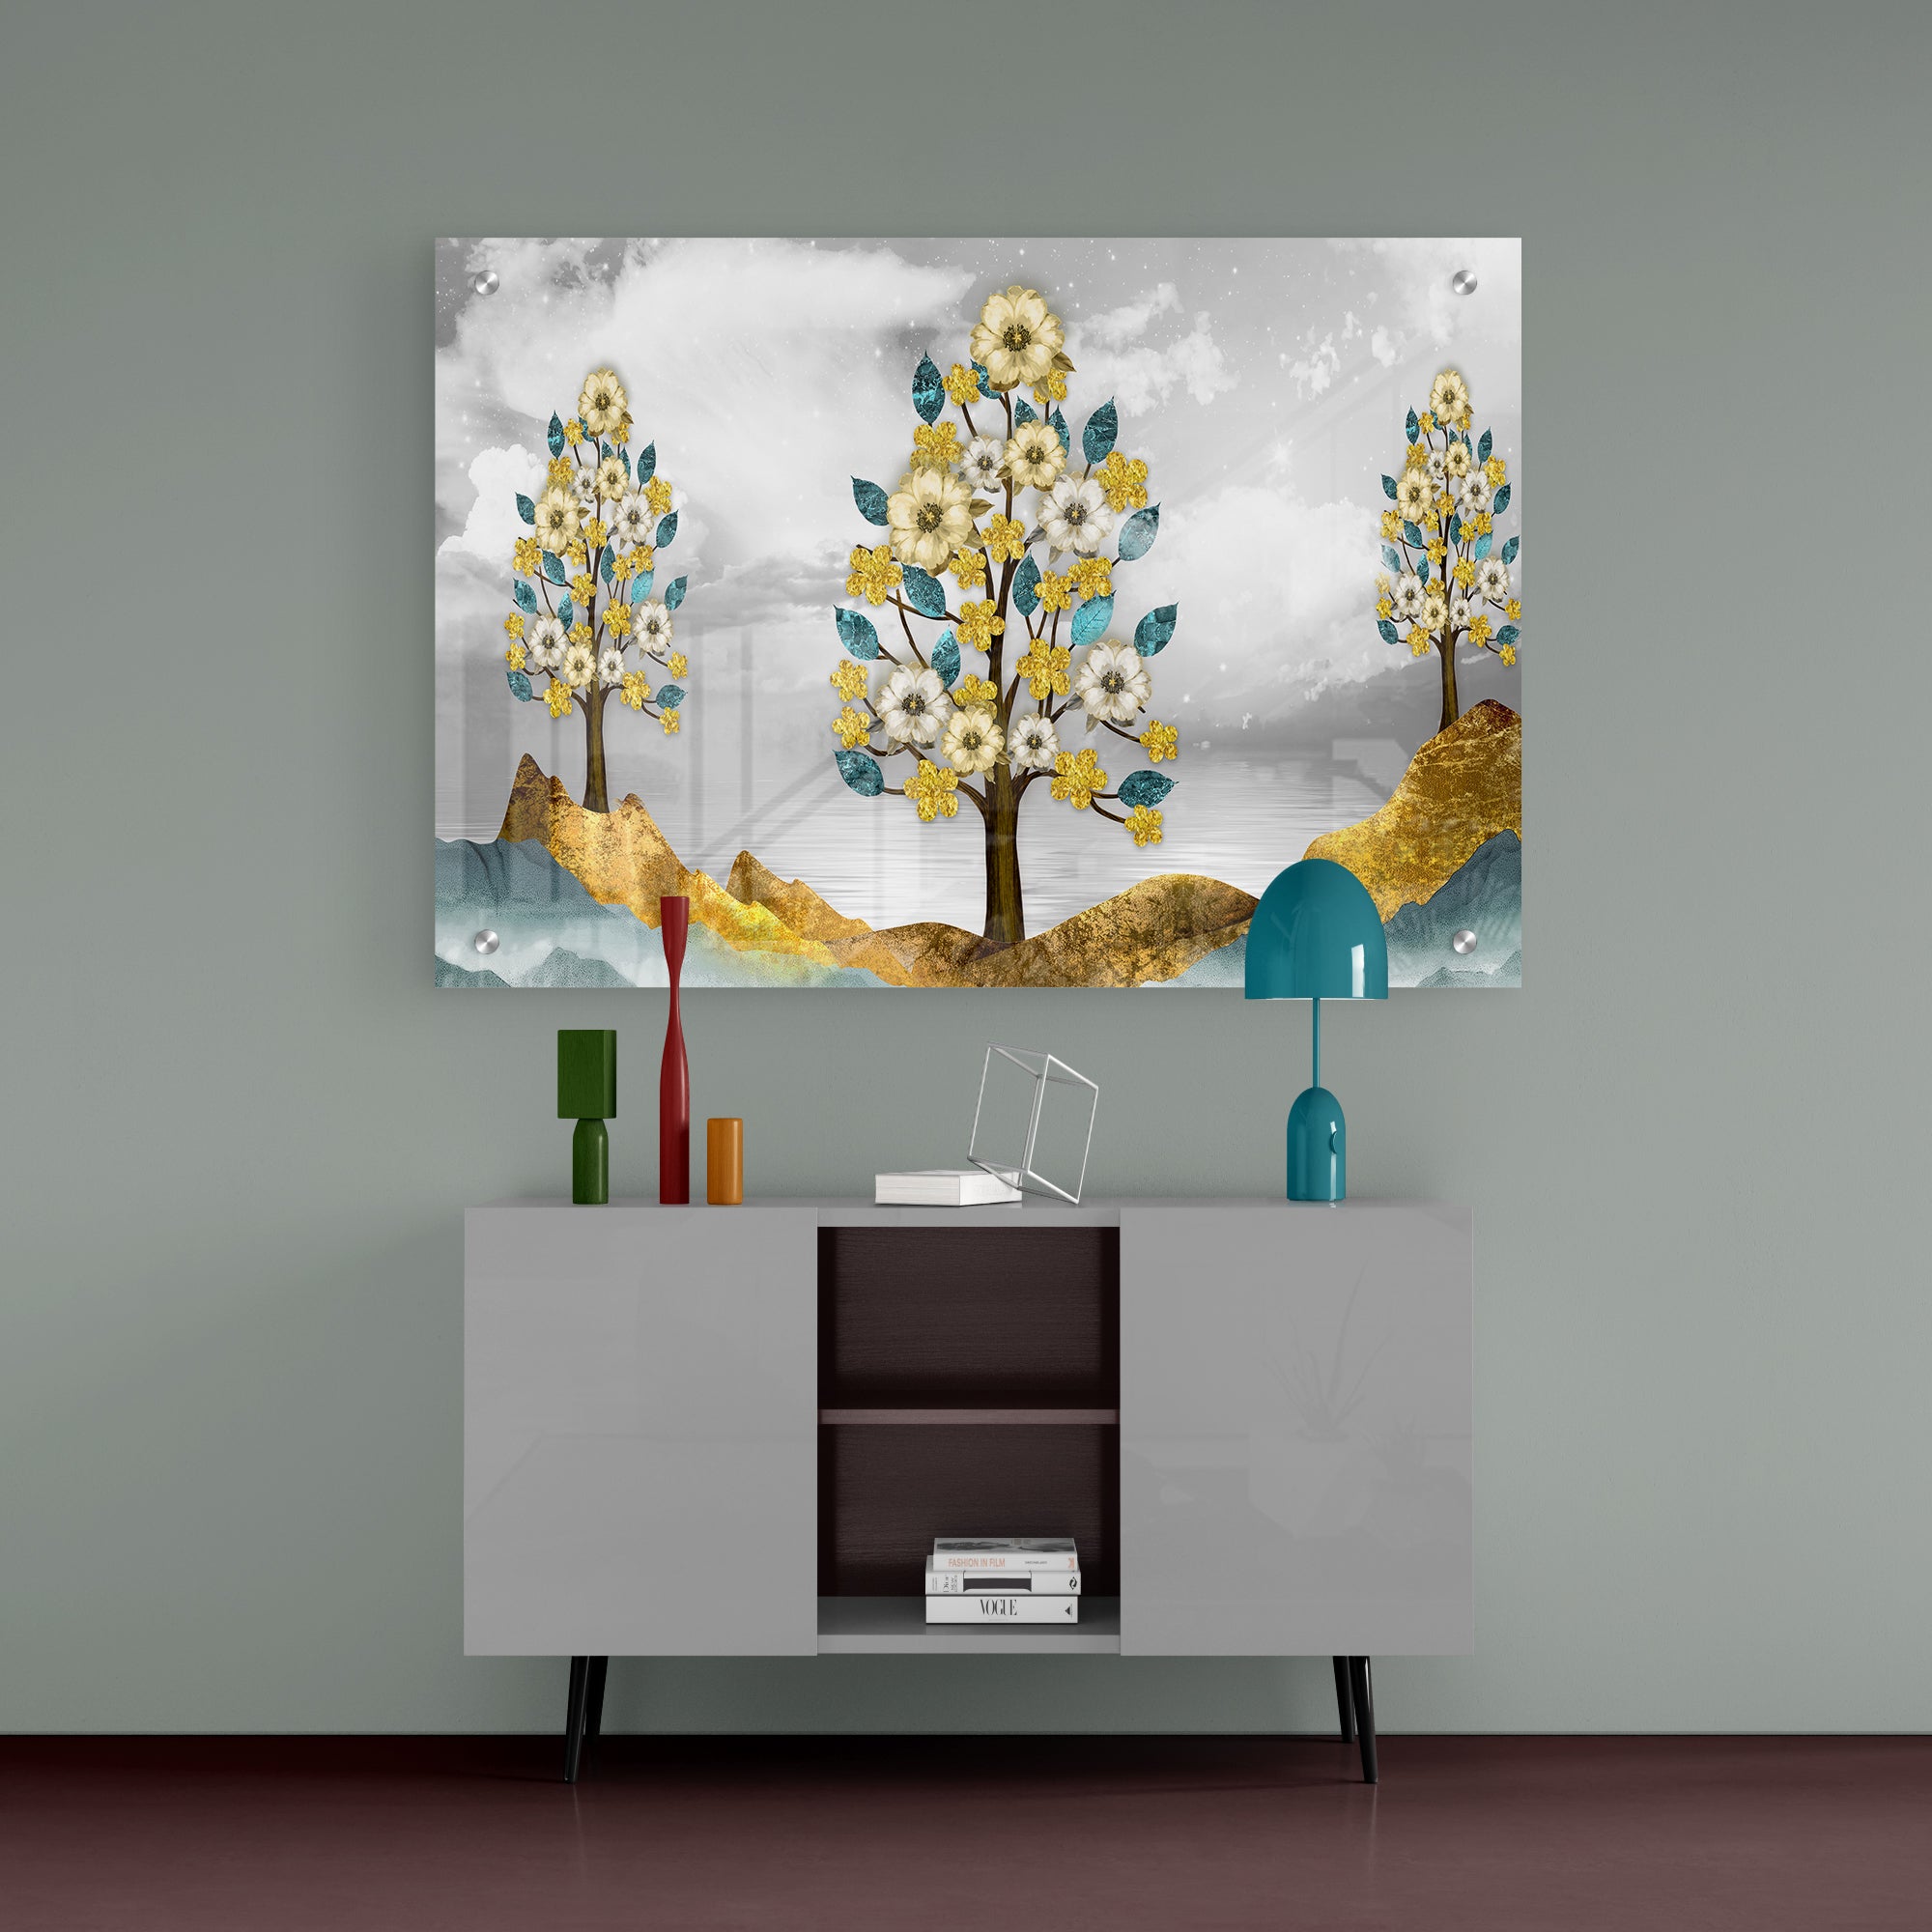 Beautiful Golden Flowers and Turquoise Mountains Acrylic Wall Painting